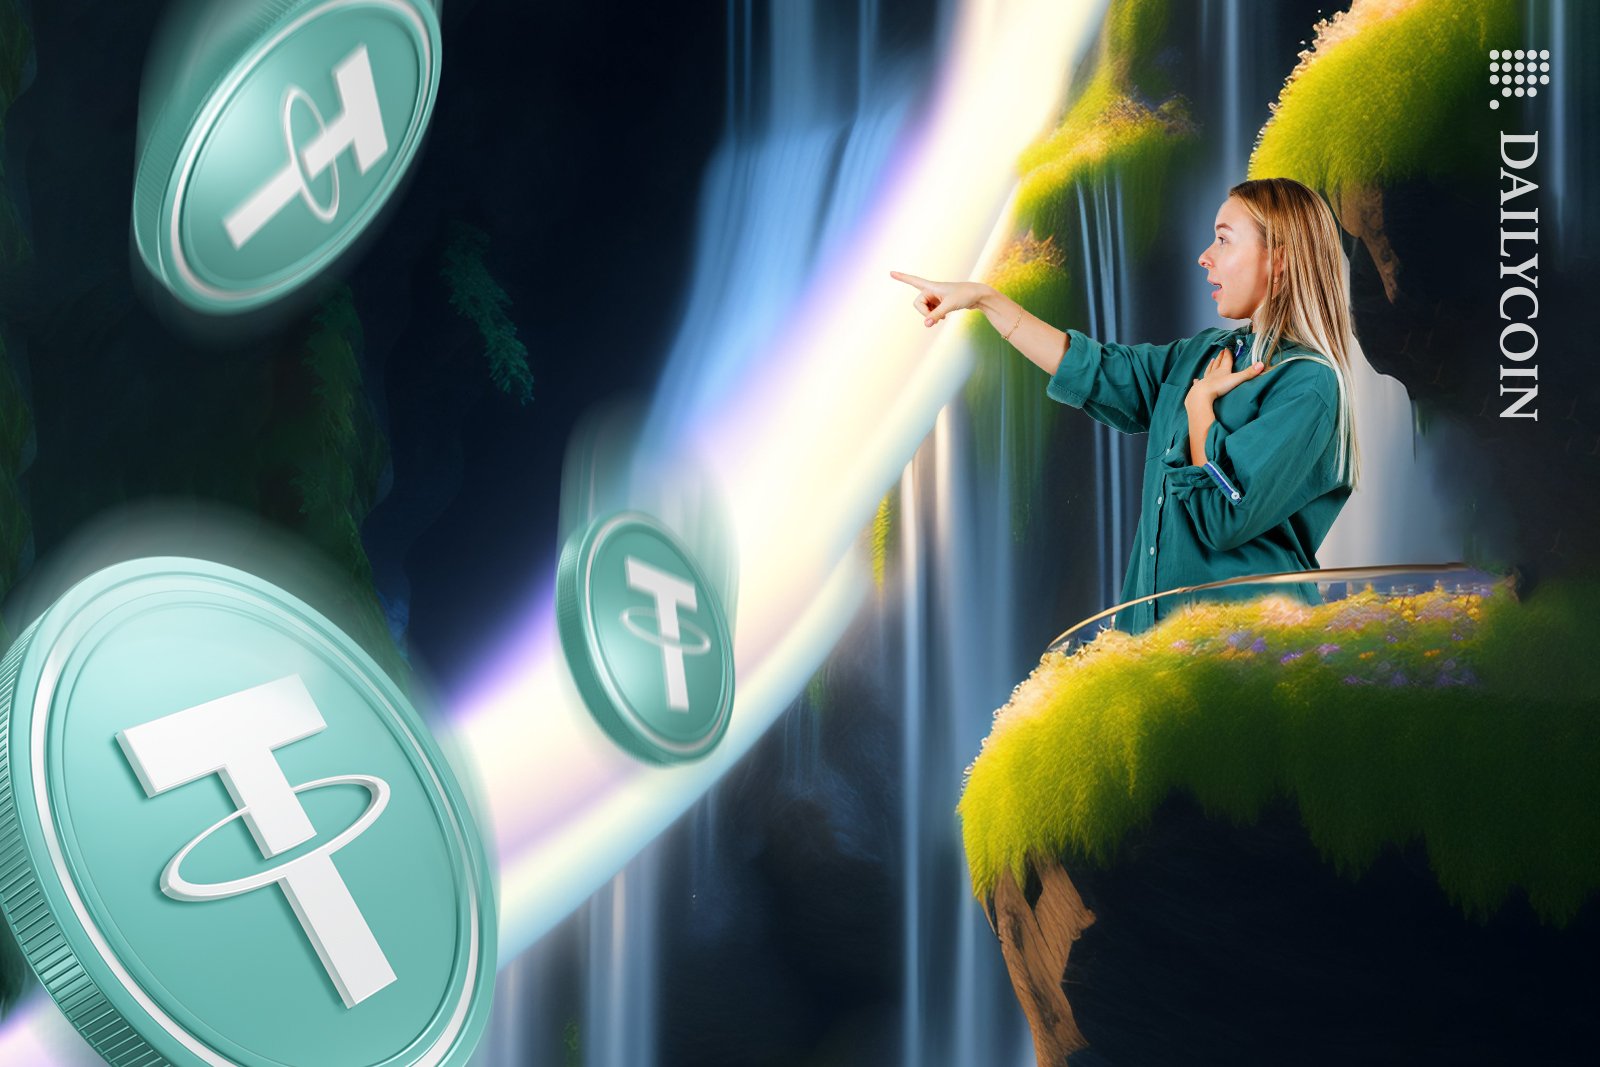 Lady pointing at Tether coins falling.